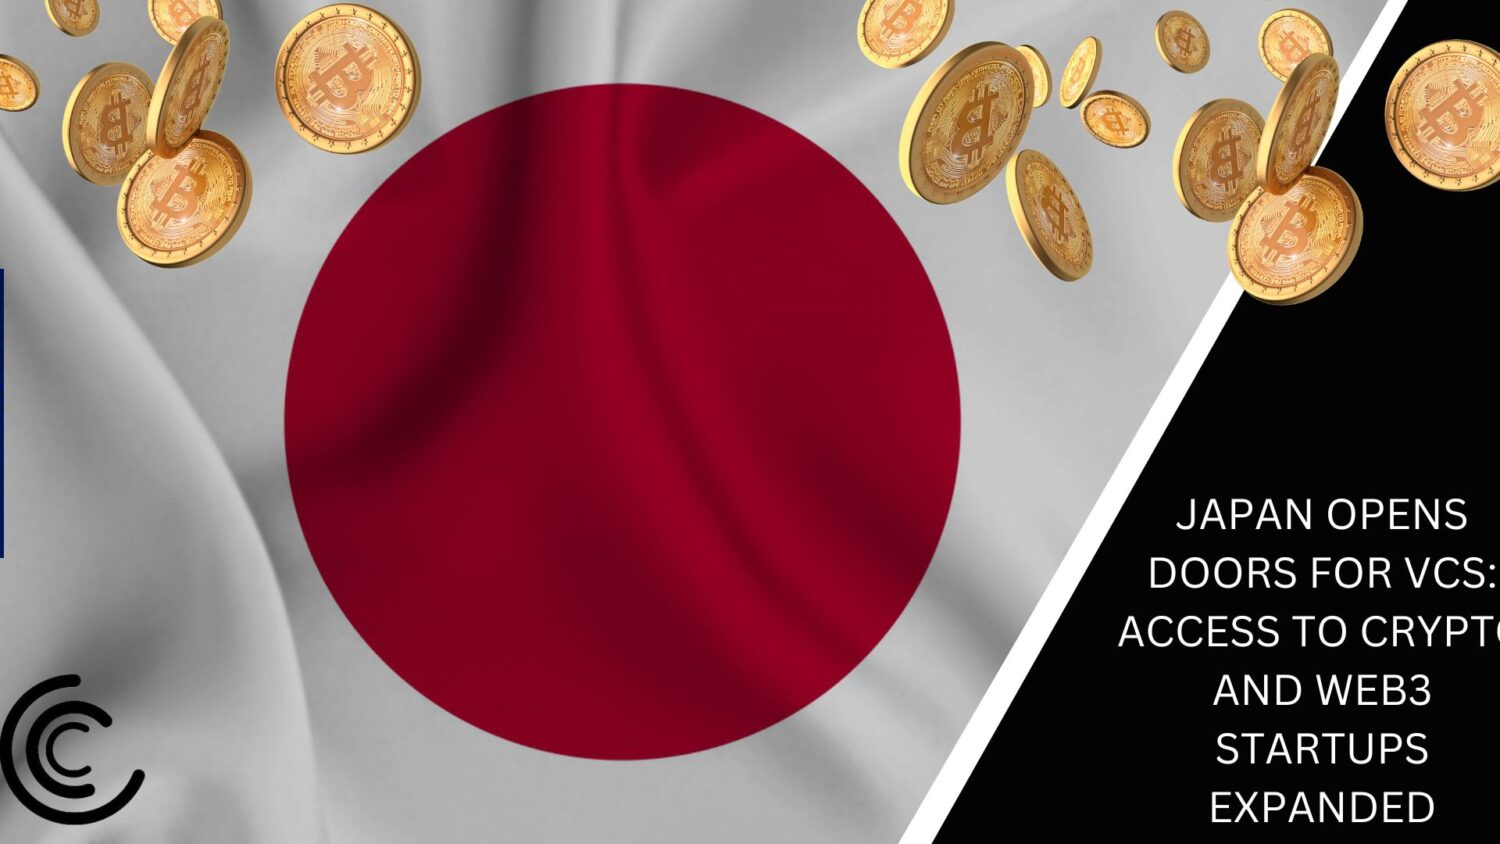 Japan Opens Doors For Vcs: Access To Crypto And Web3 Startups Expanded